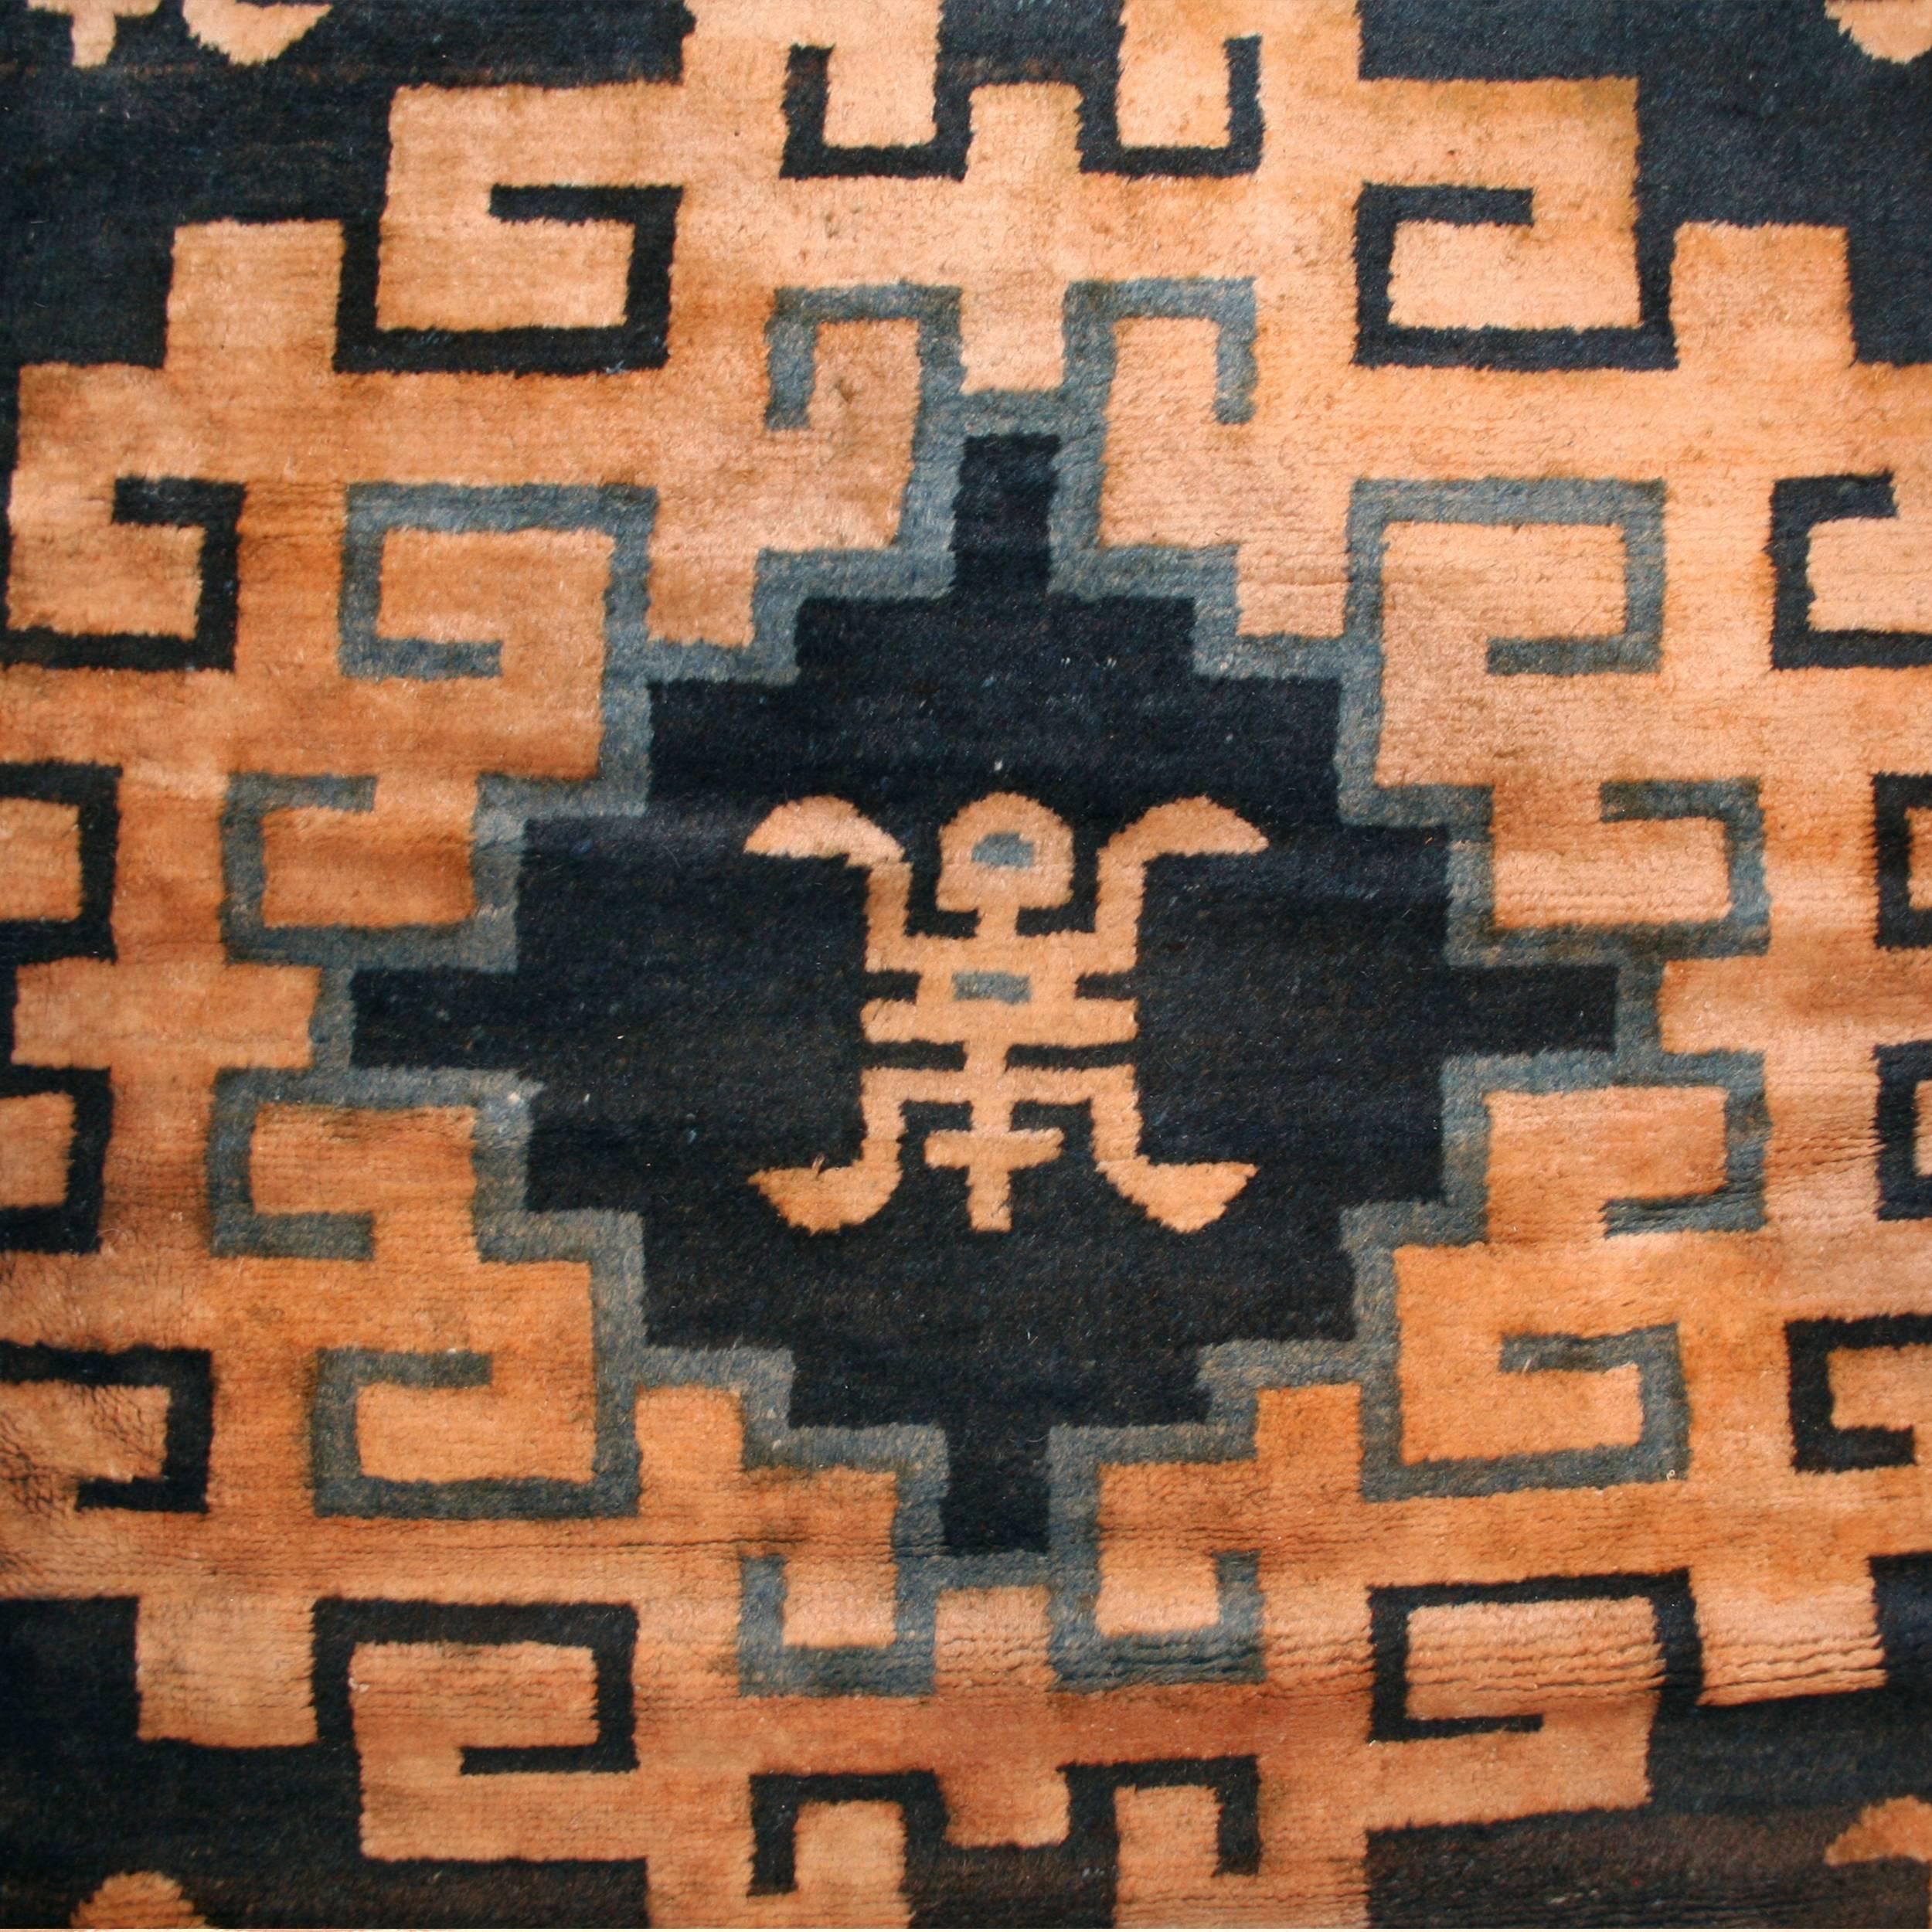 The rare carpets of Mongolia have in recent years achieved a stature of their own. They differ from traditional 19th century Chinese carpets in that they typically employ stylized patterns taken from early Chinese iconography and favour a palette of